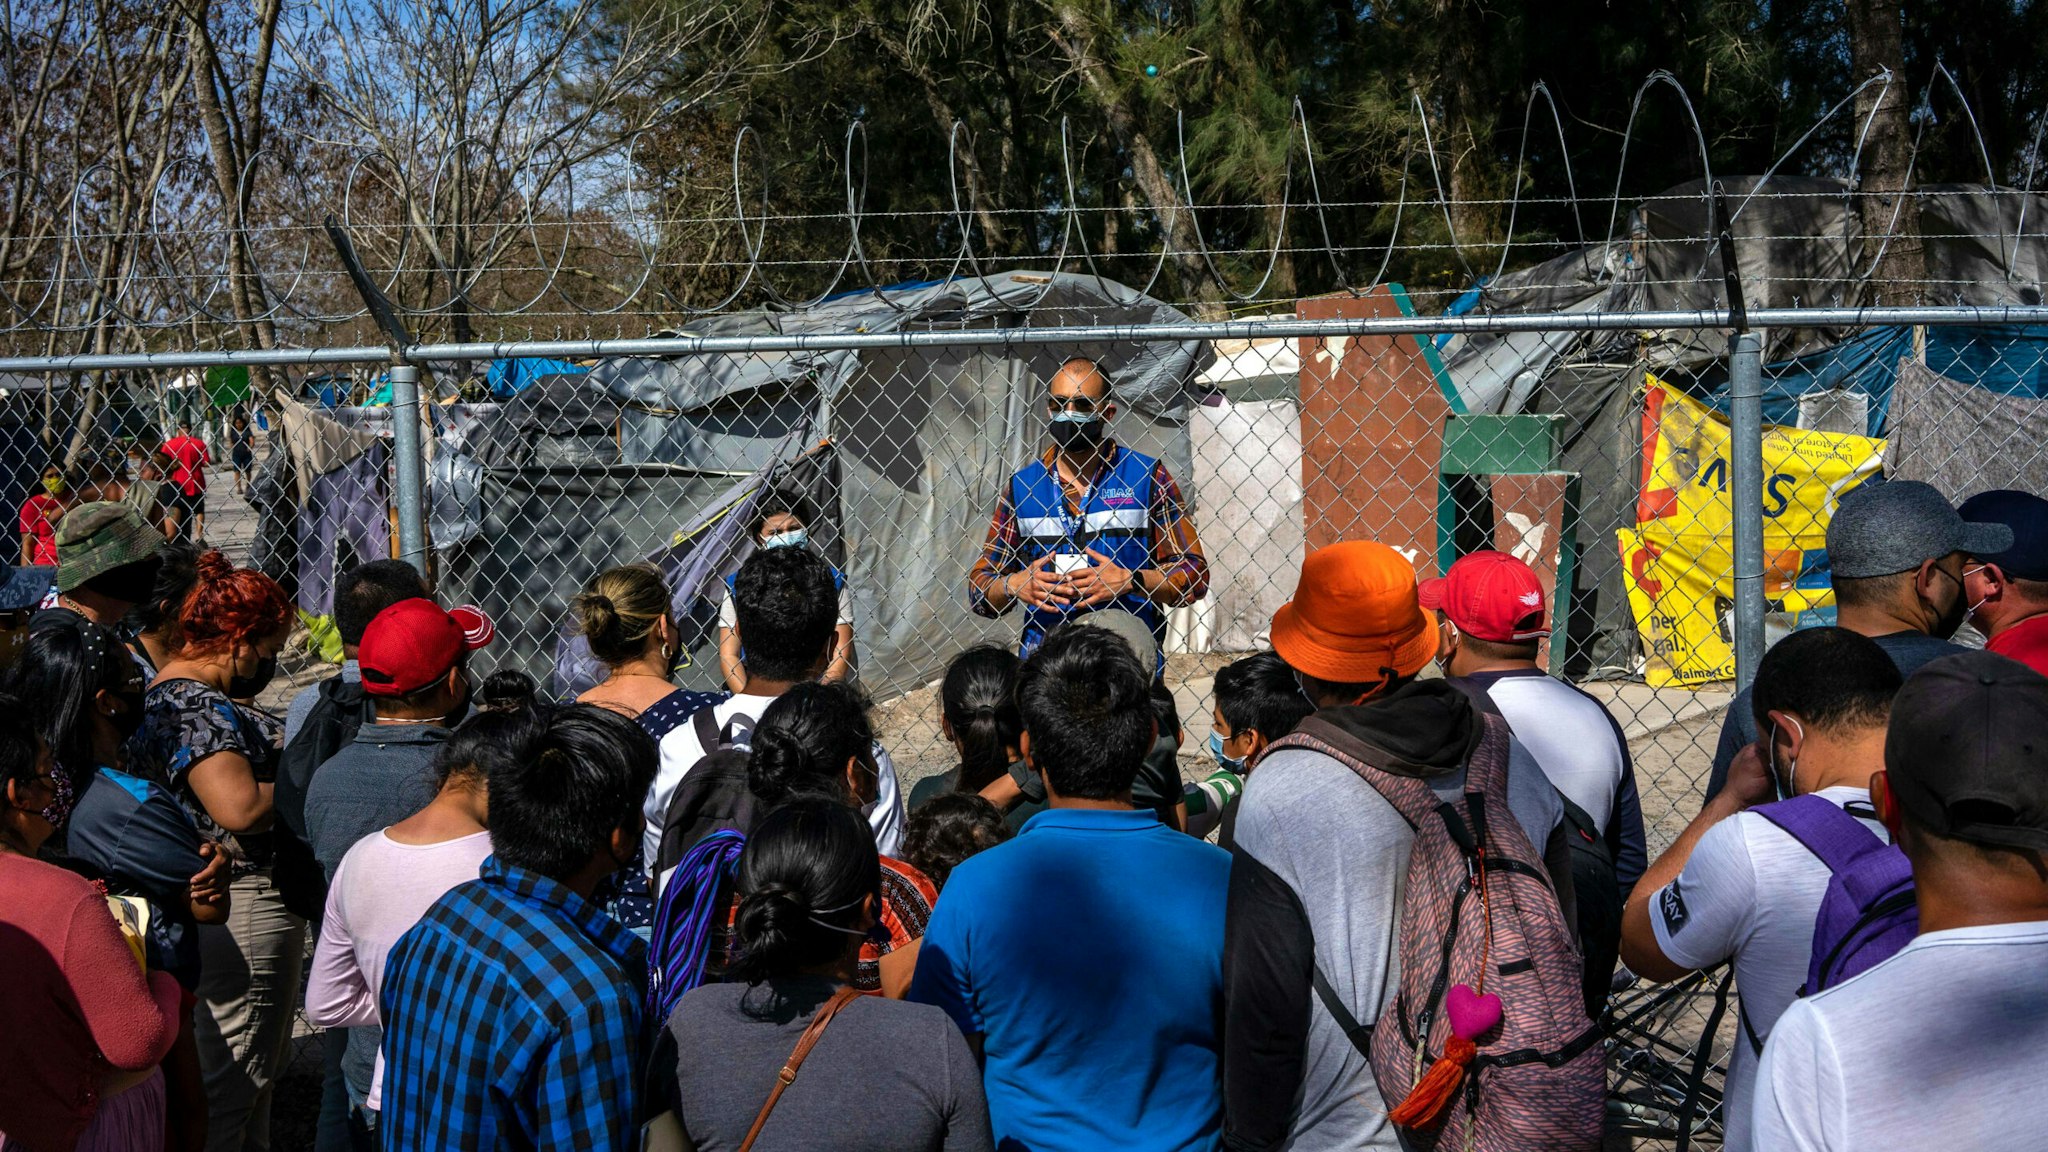 A worker with a nonprofit organization speaks with migrants as they prepare to cross the border into the United States in Matamoros, Tamaulipas state, Mexico, on Friday, Feb. 26, 2021. Emptying the camp in Matamoros would eliminate a symbol of Former U.S. President Donald Trump's immigration crackdown and count as an early success for Presidnt Biden, who aims to undo his predecessor's most draconian anti-immigrant policies.